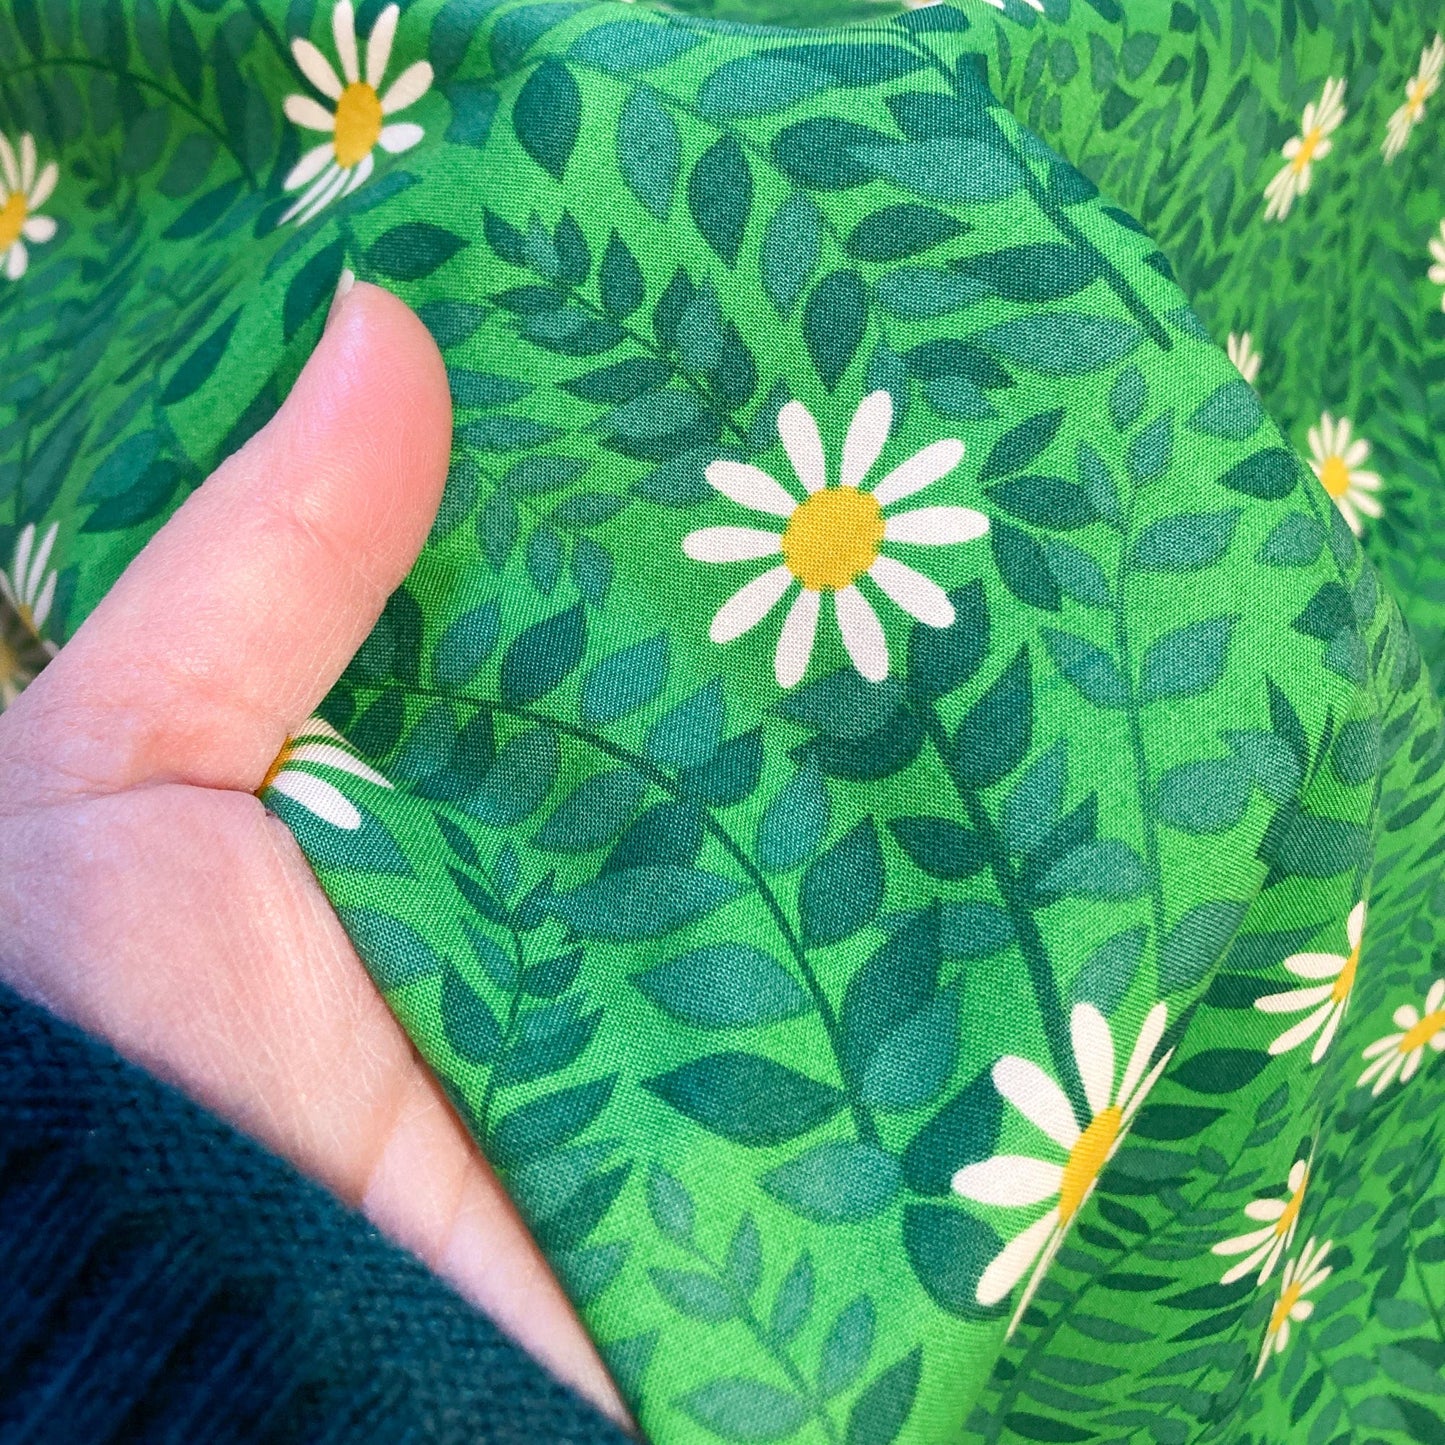 Ruby Star Society 'Flowerland' Quilting Cotton 'Daisies' in Verdant